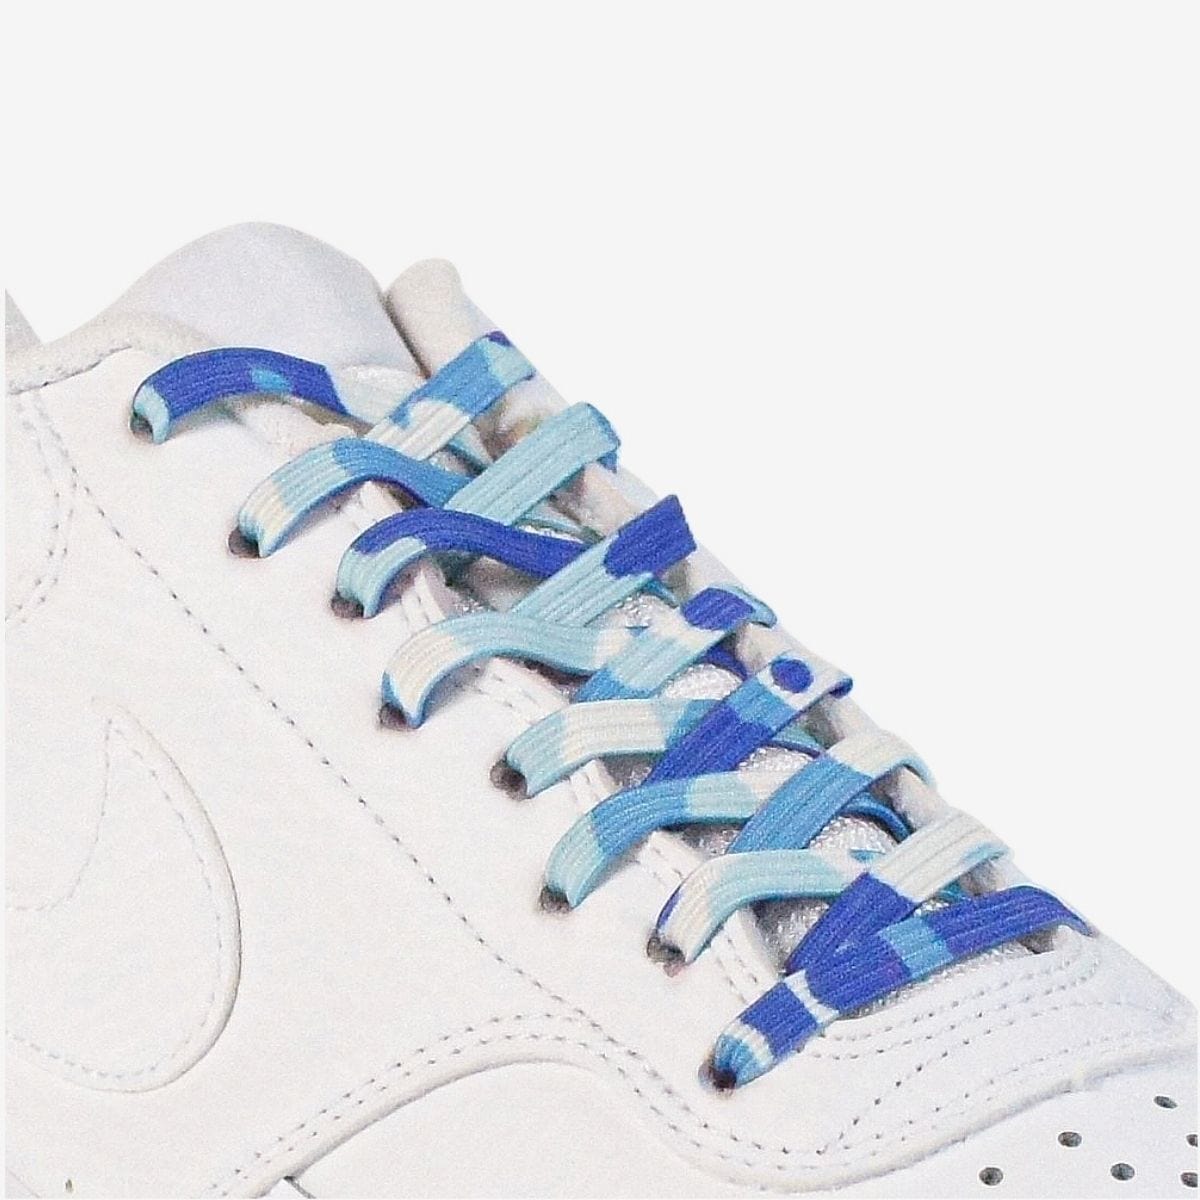 different-ways-to-lace-shoes-with-blue-camo-elastic-shoelaces-on-white-kicks